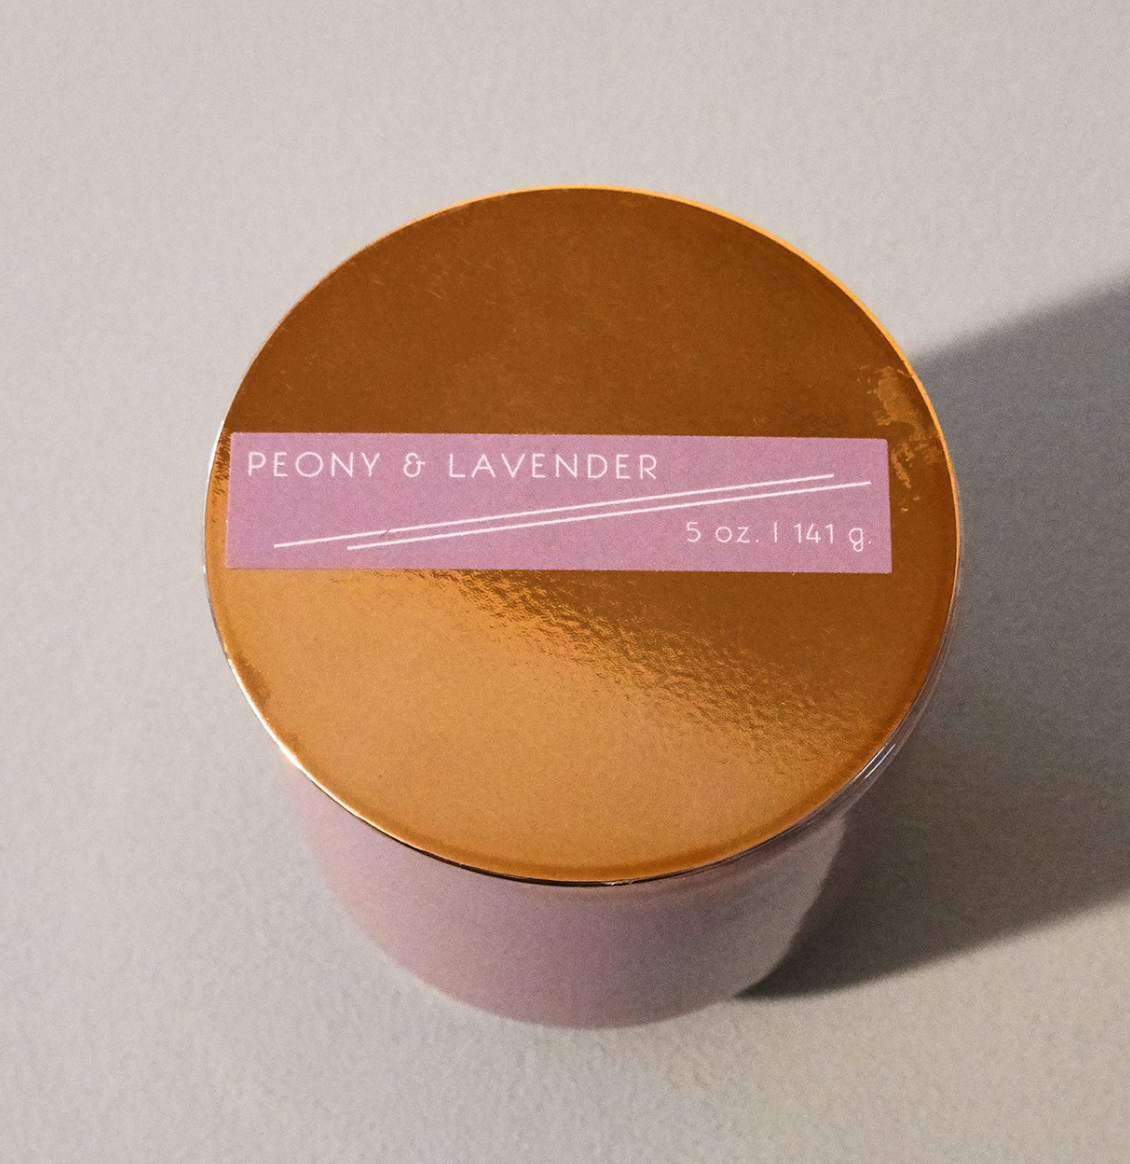 Peony & Lavender Candle